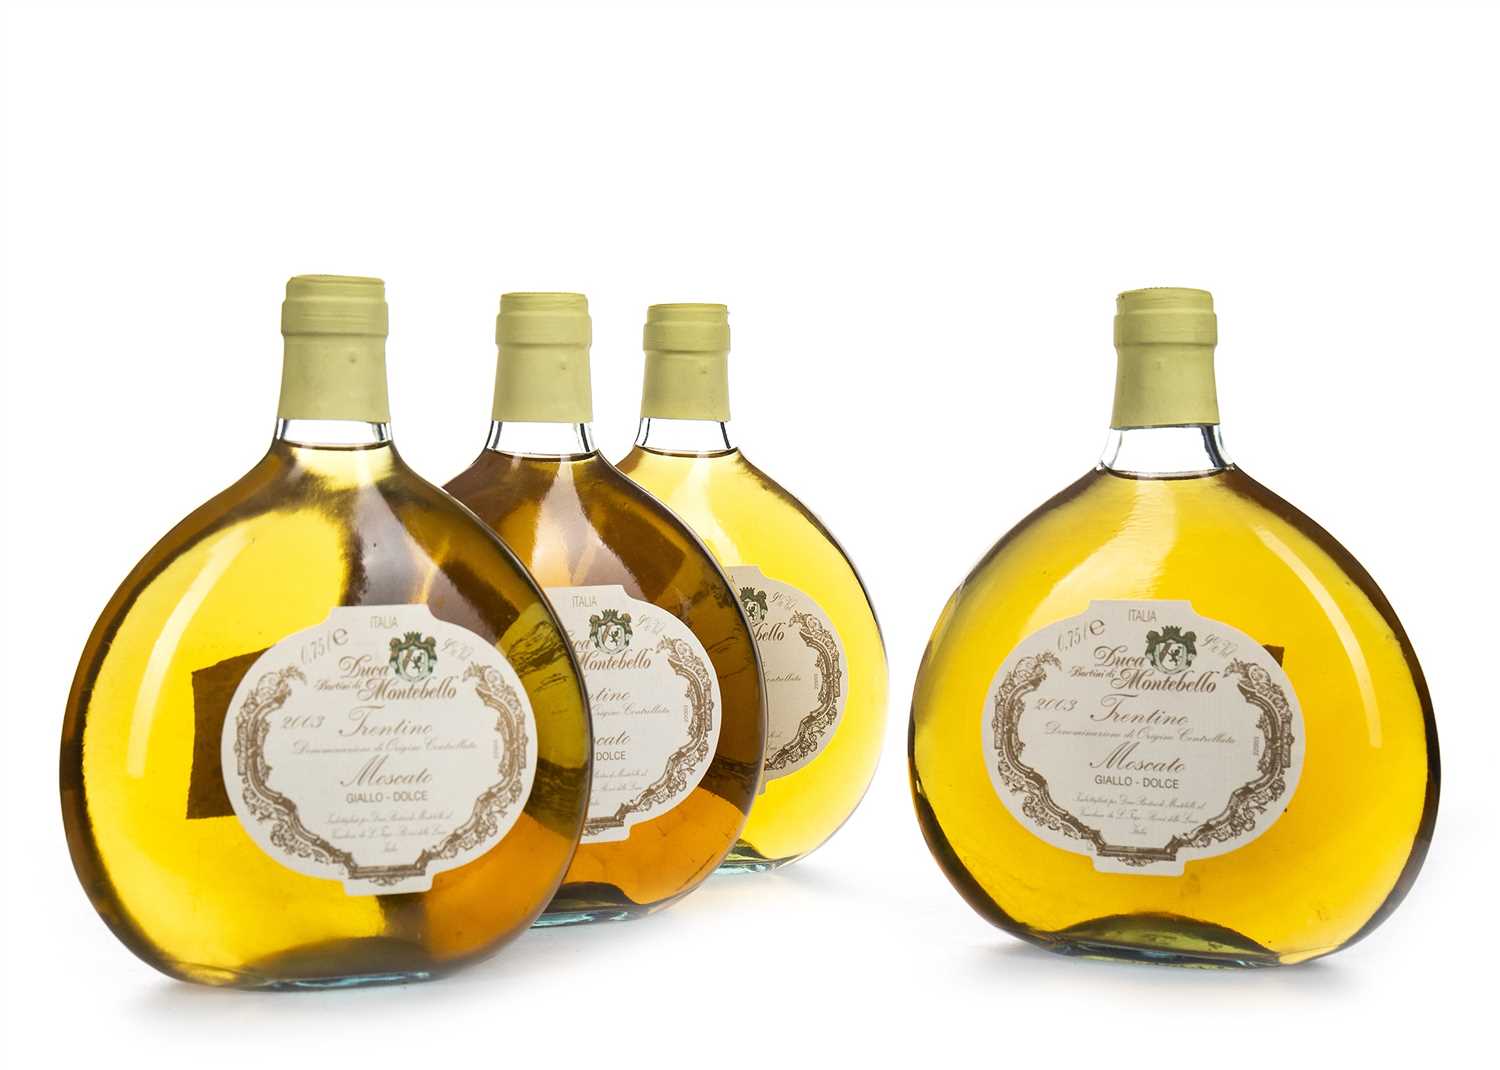 Lot 1018 - FOUR BOTTLES OF FRENTINO MOSCATO 2003 DOLCE